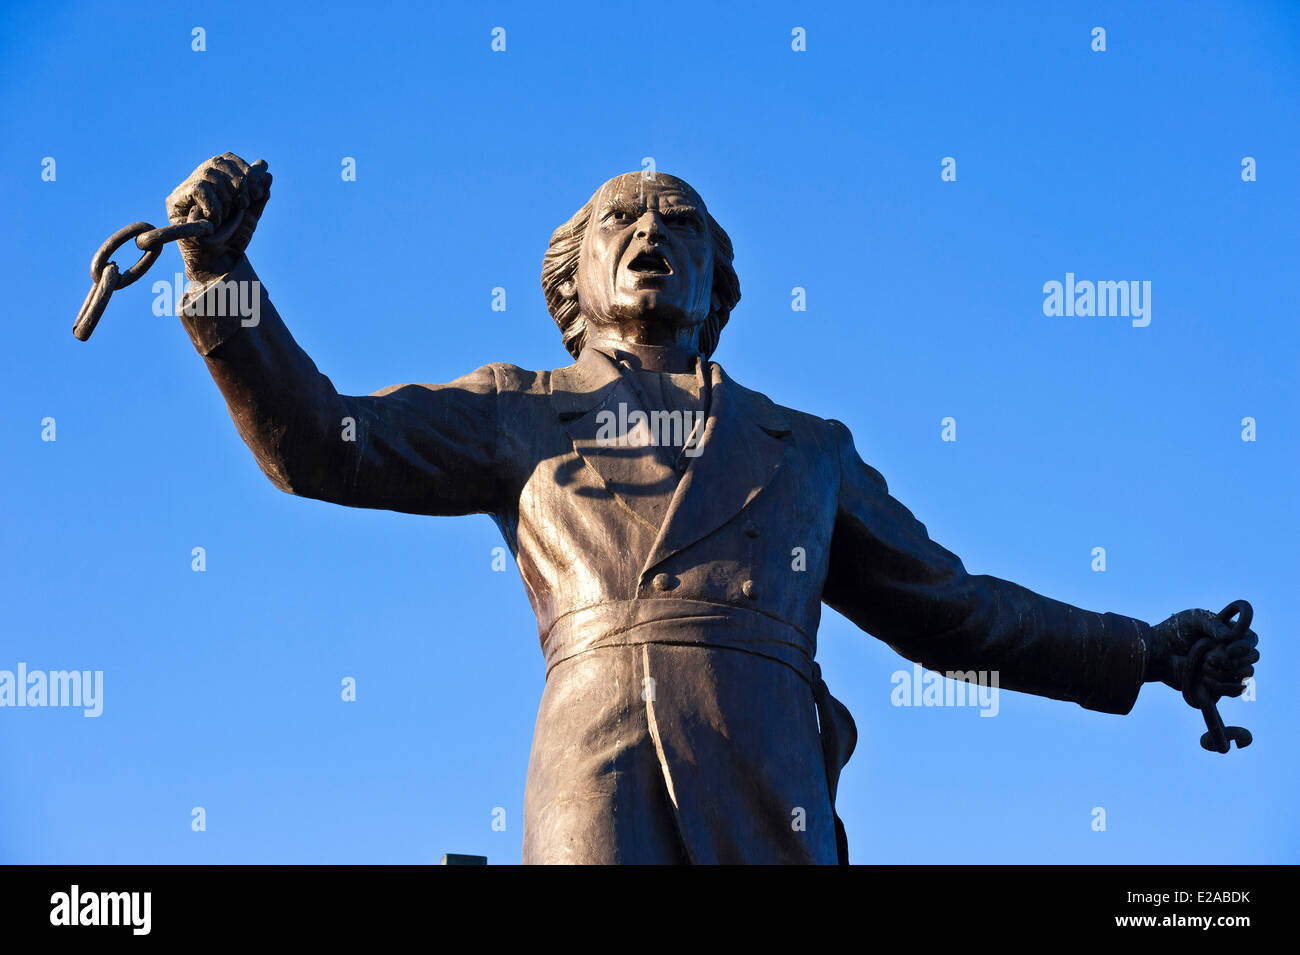 Mexico, Jalisco state, Guadalajara, Plaza de la Liberaci¾n, the statue of Miguel Hidalgo, father of Independence Stock Photo